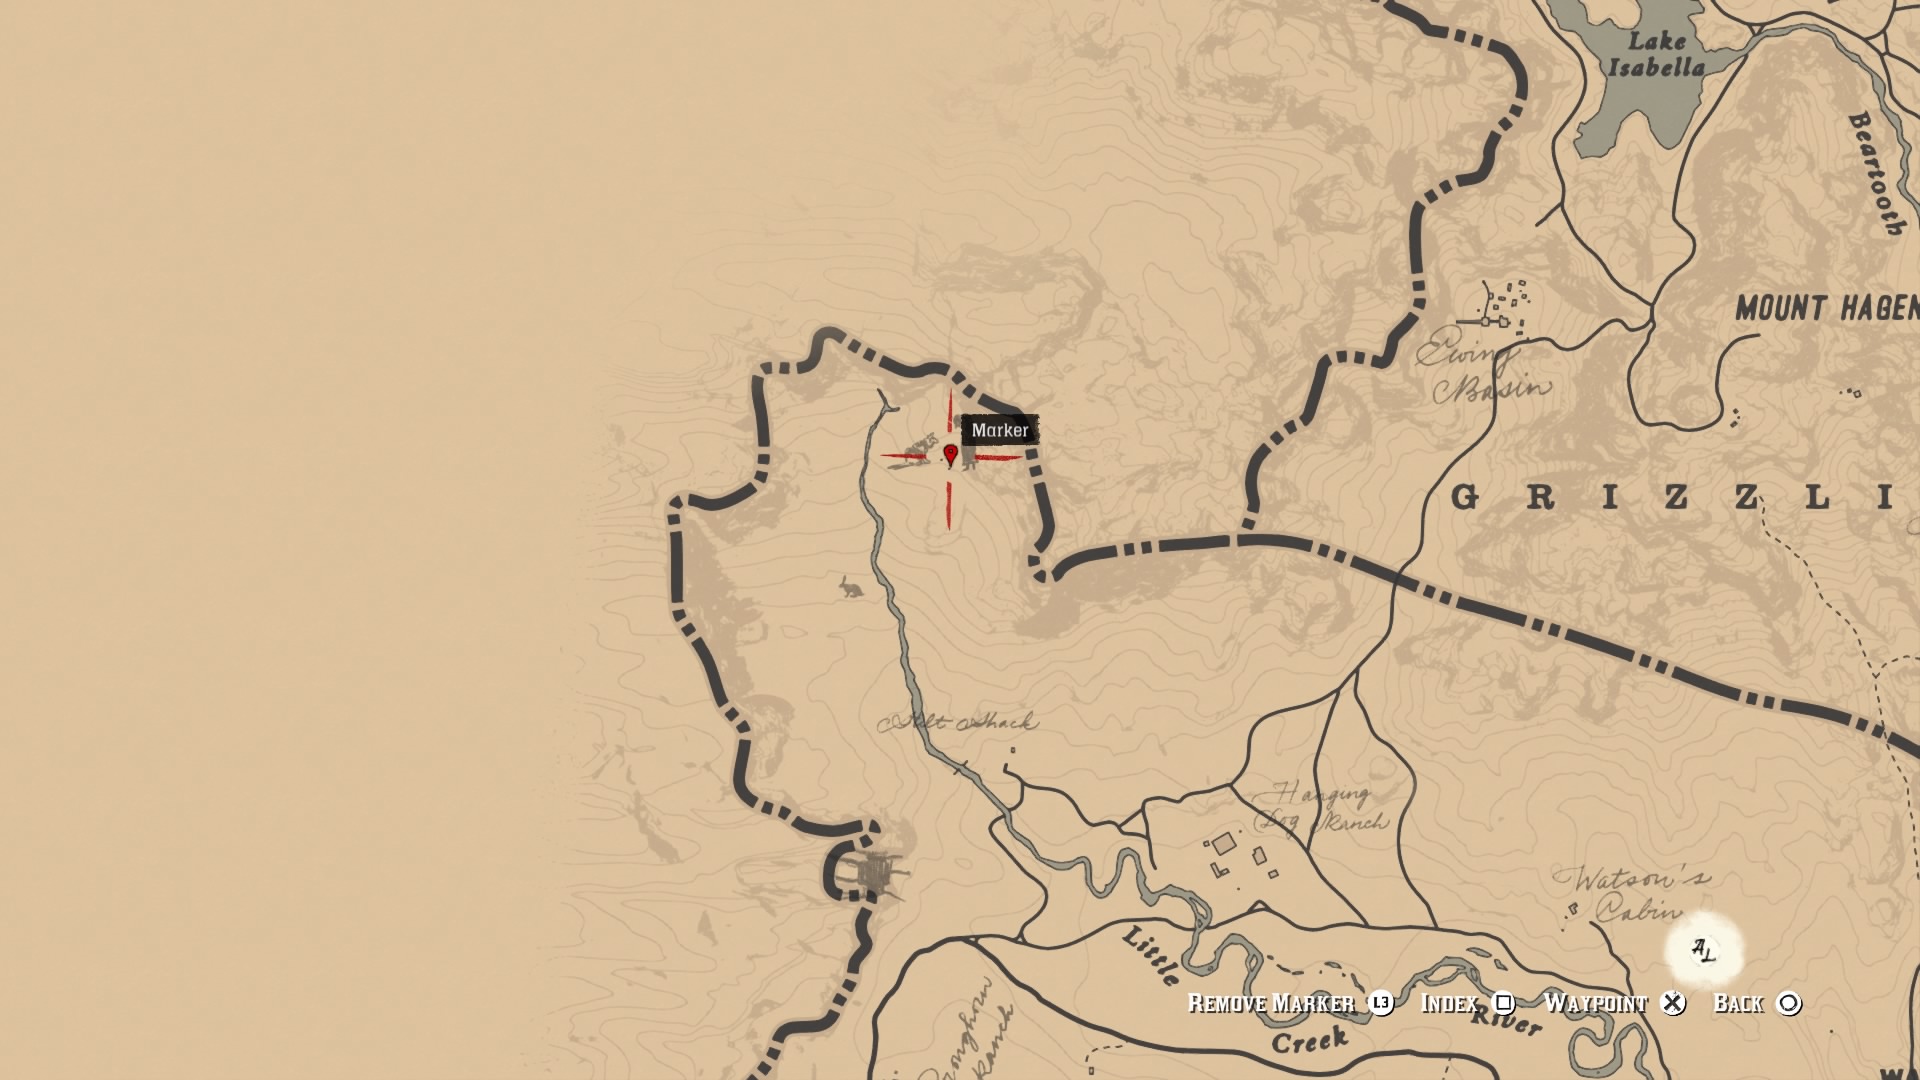 Red Dead Redemption 2's full map leaked